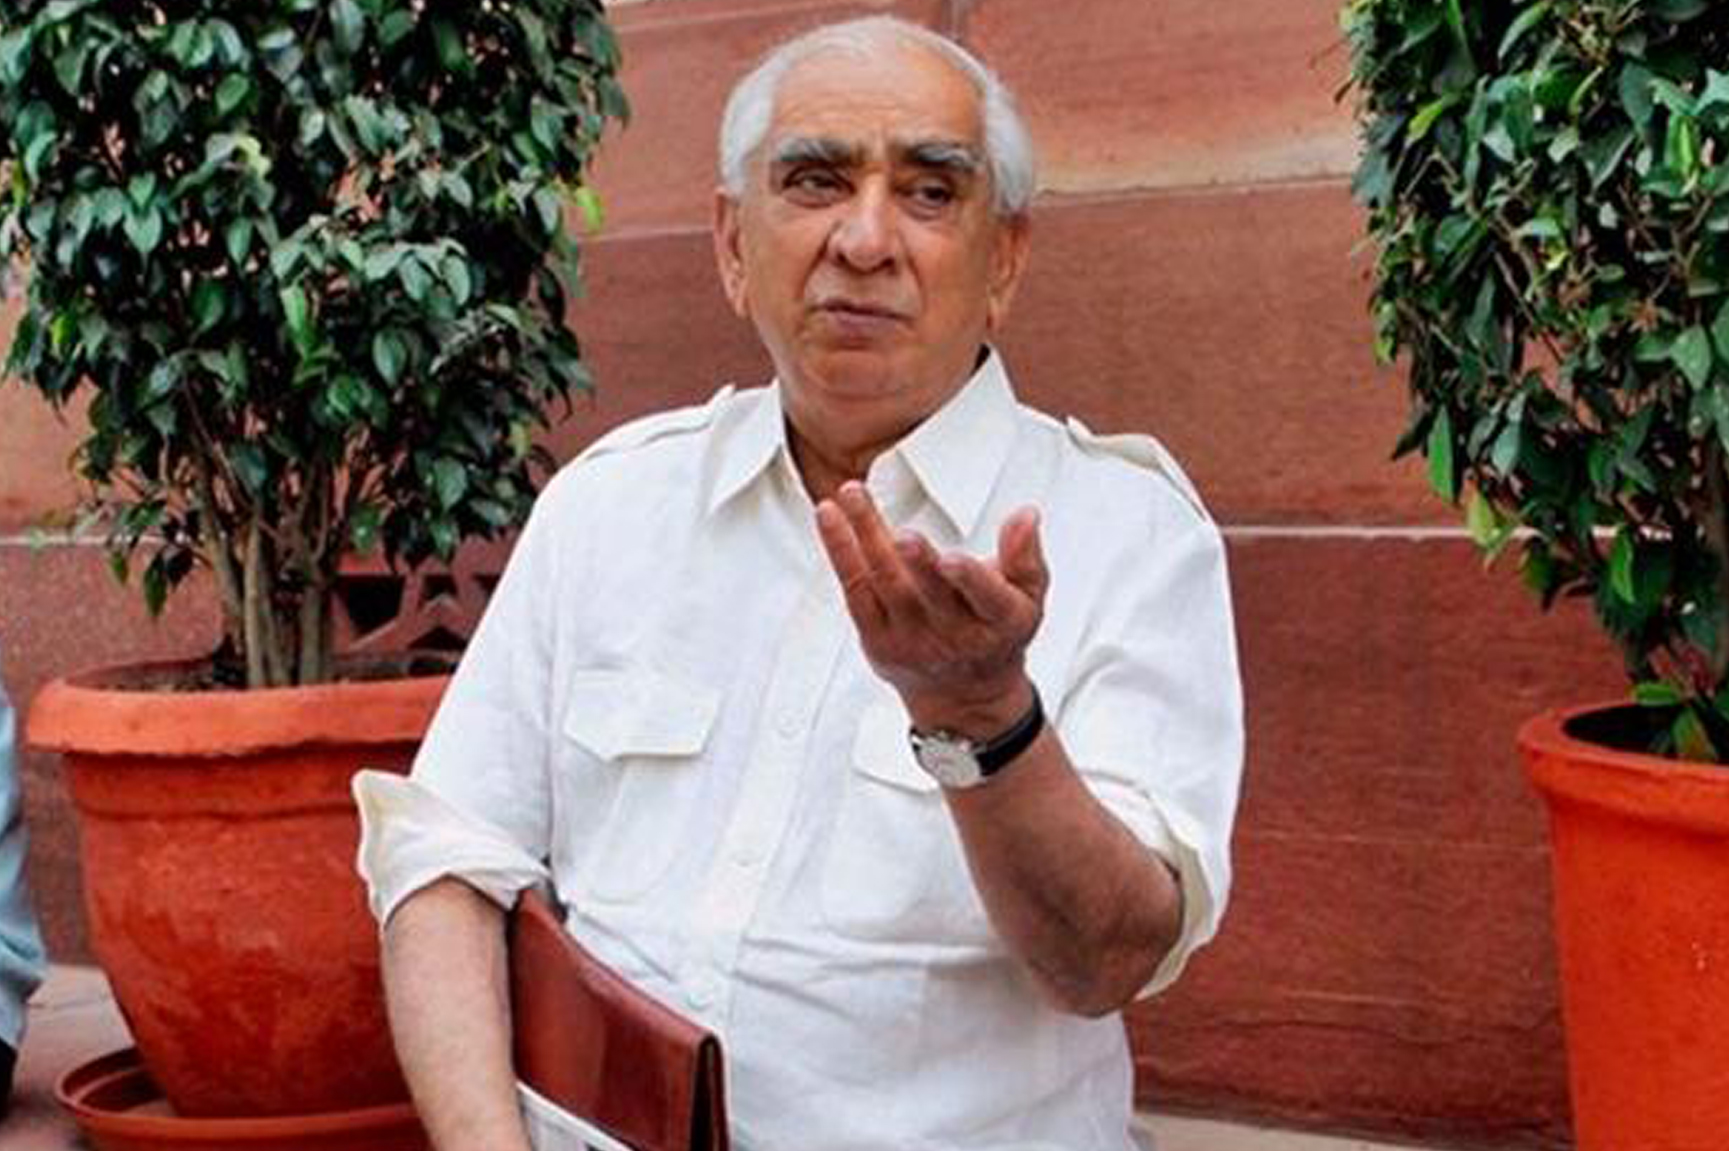 Jaswant Singh, former minister, died on Sunday morning in Delhi. He was a long-standing Member of Parliament. He was a minister of defence, finance and foreign affairs. He was 82.